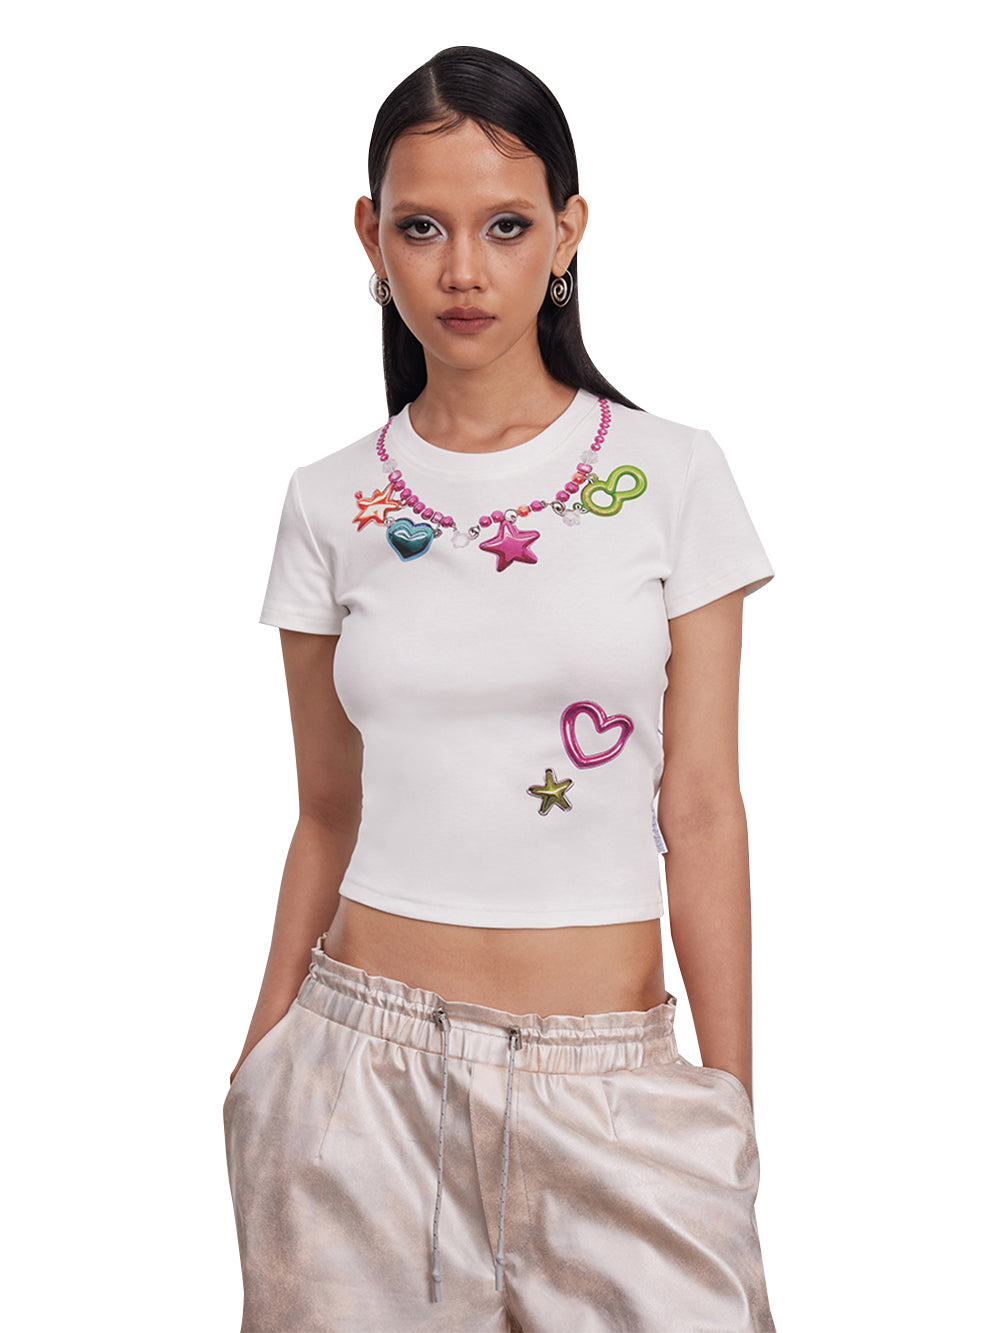 MUKTANK x Damage Asia Necklace Printed Stretchy T-shirt